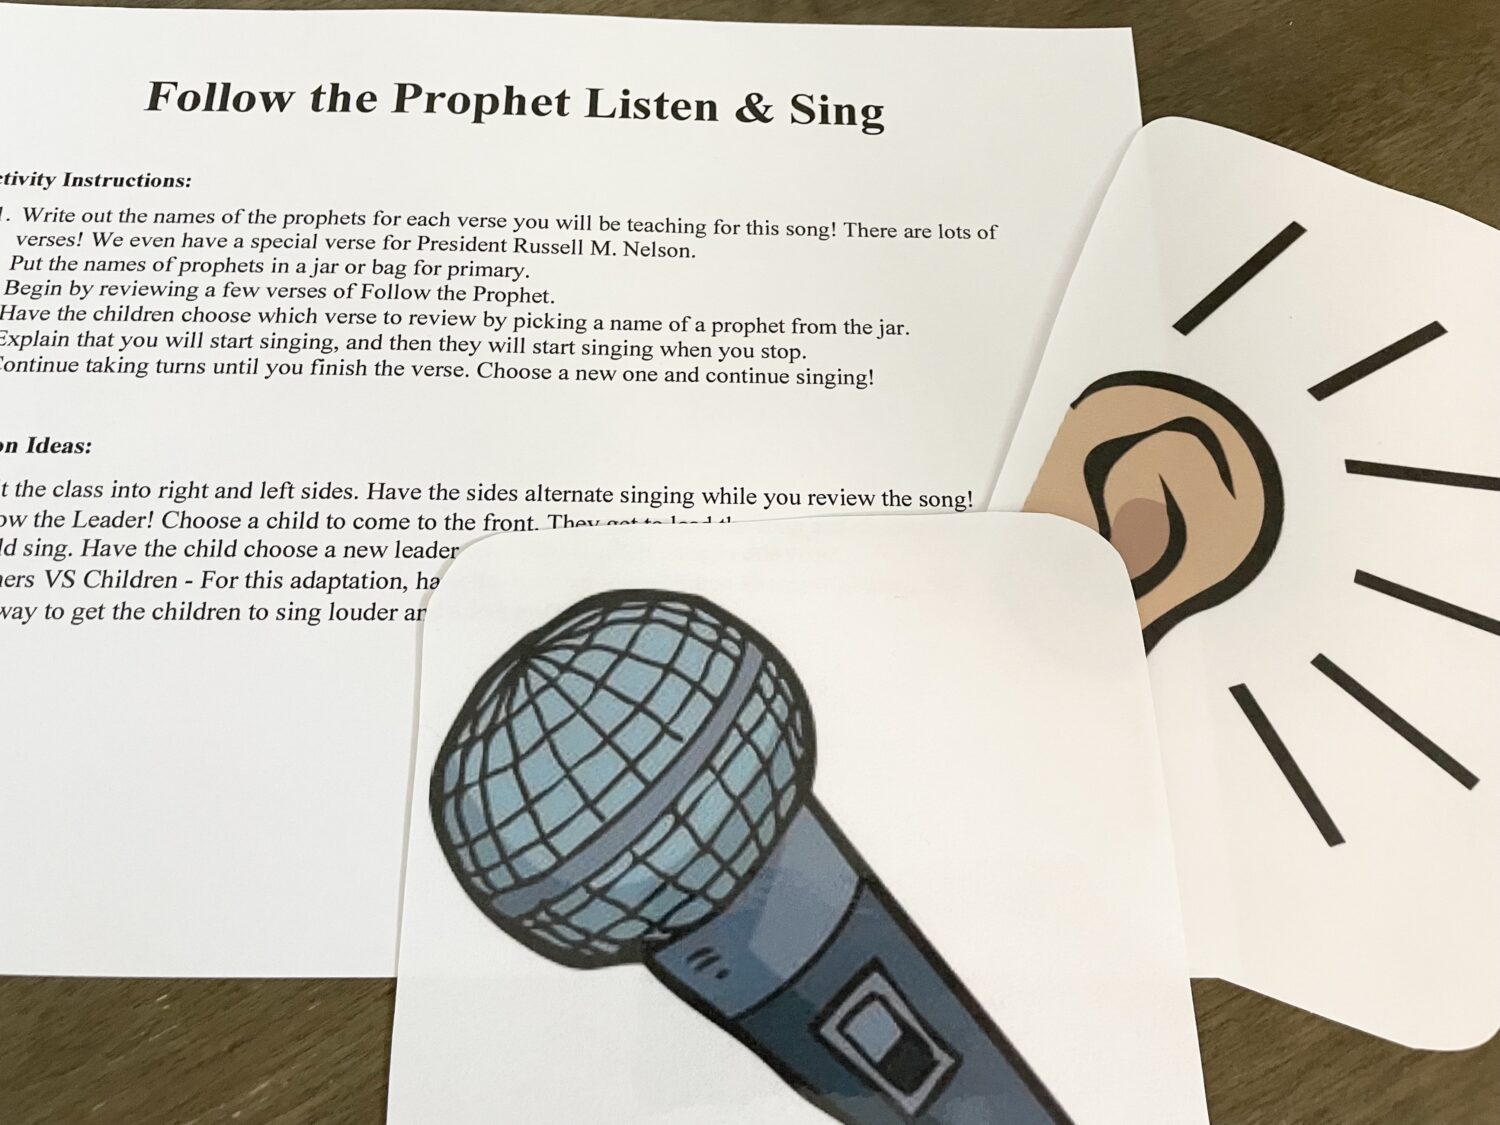 Follow the Prophet Listen & Sing Easy singing time ideas for Primary Music Leaders IMG 6445 e1651696955618